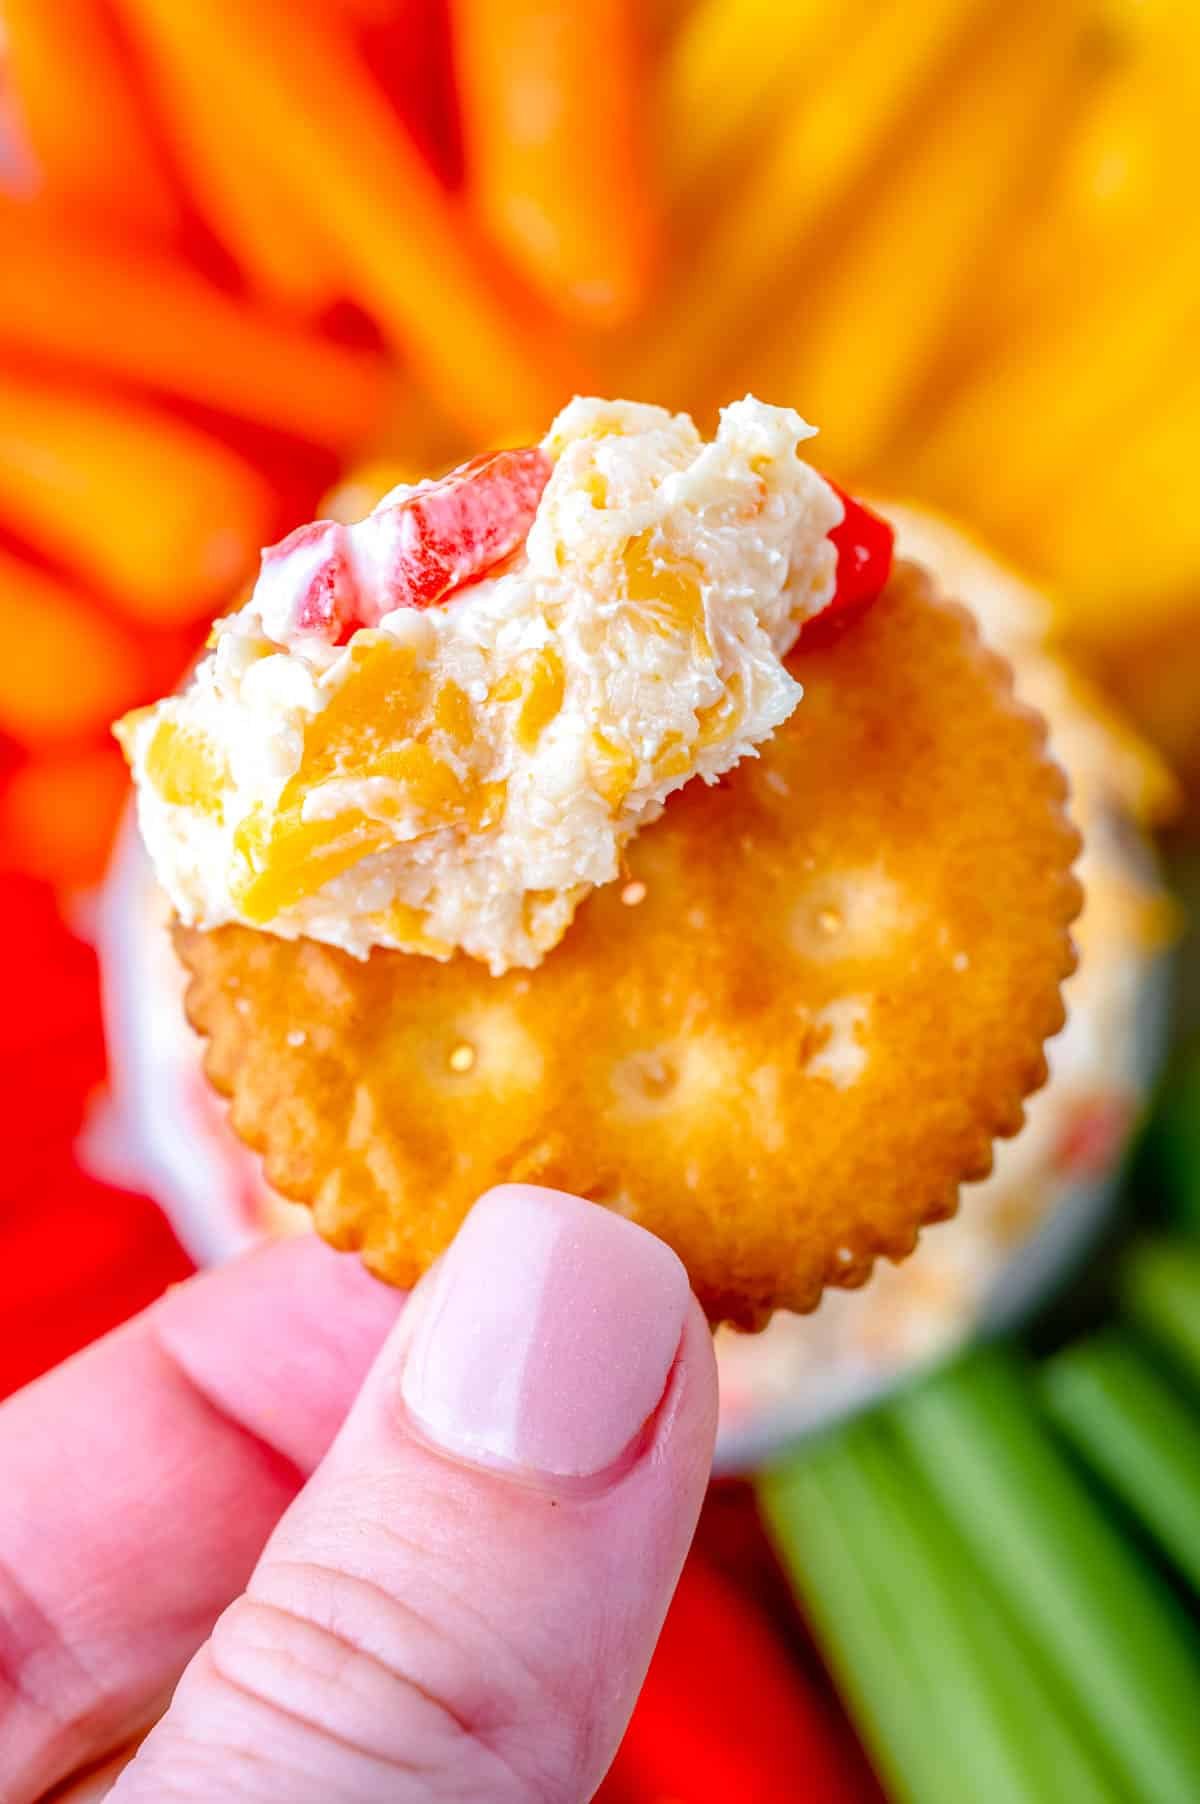 A close up picture of Pimento Cheese spread on a Ritz cracker.